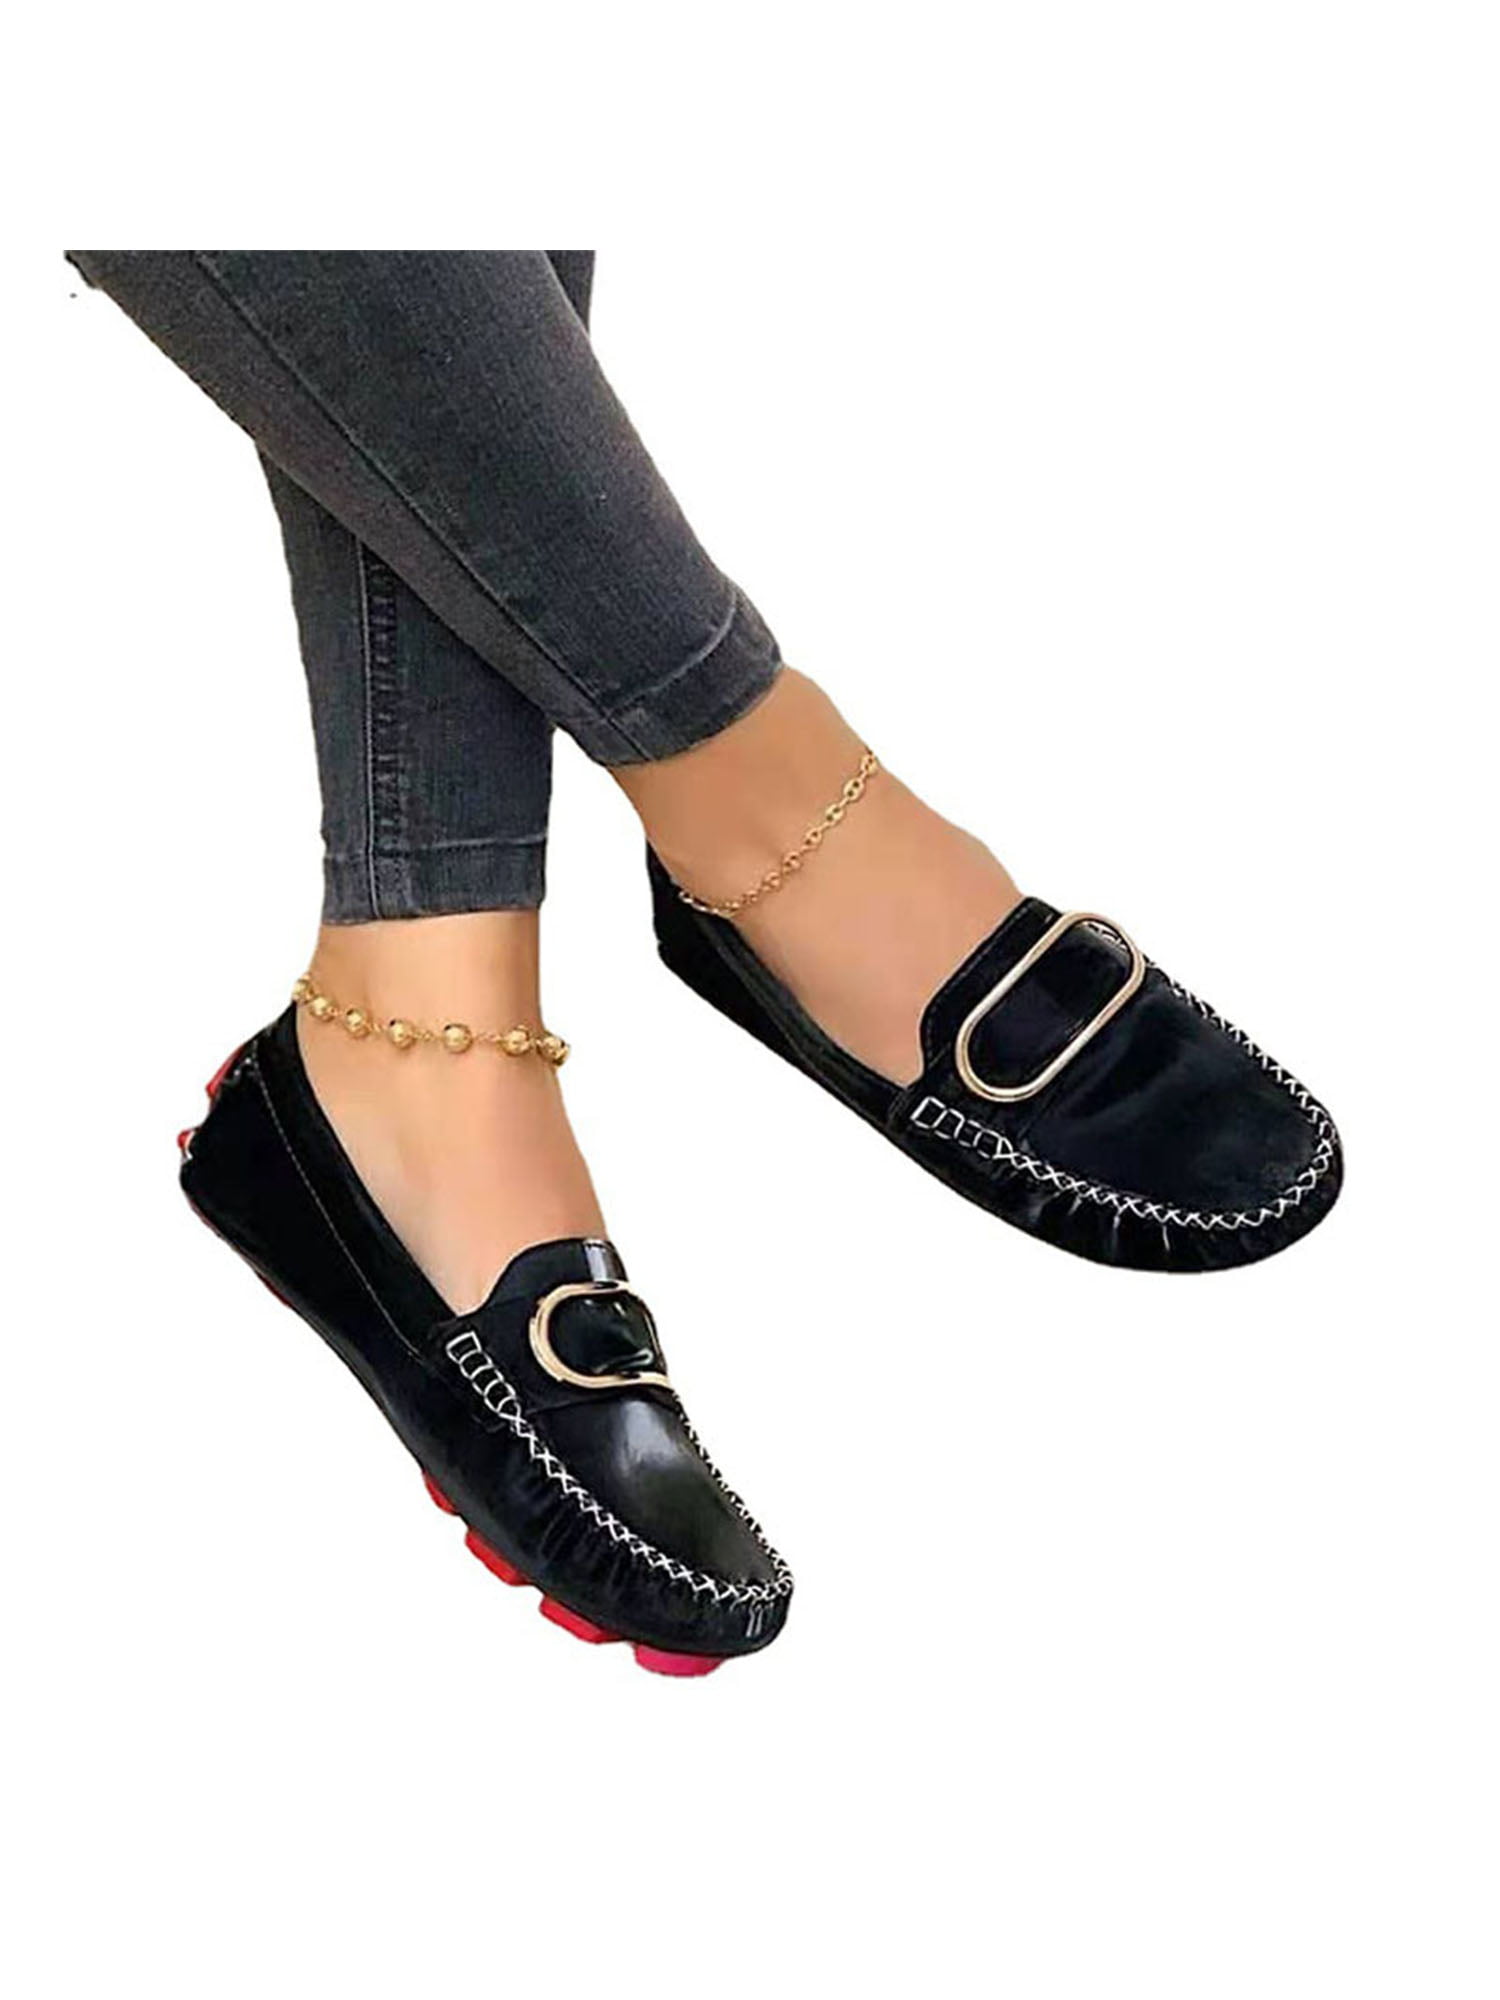 Ladies Womens Casual Buckle Low Heel Loafers Work Office Pumps School Shoes Size 